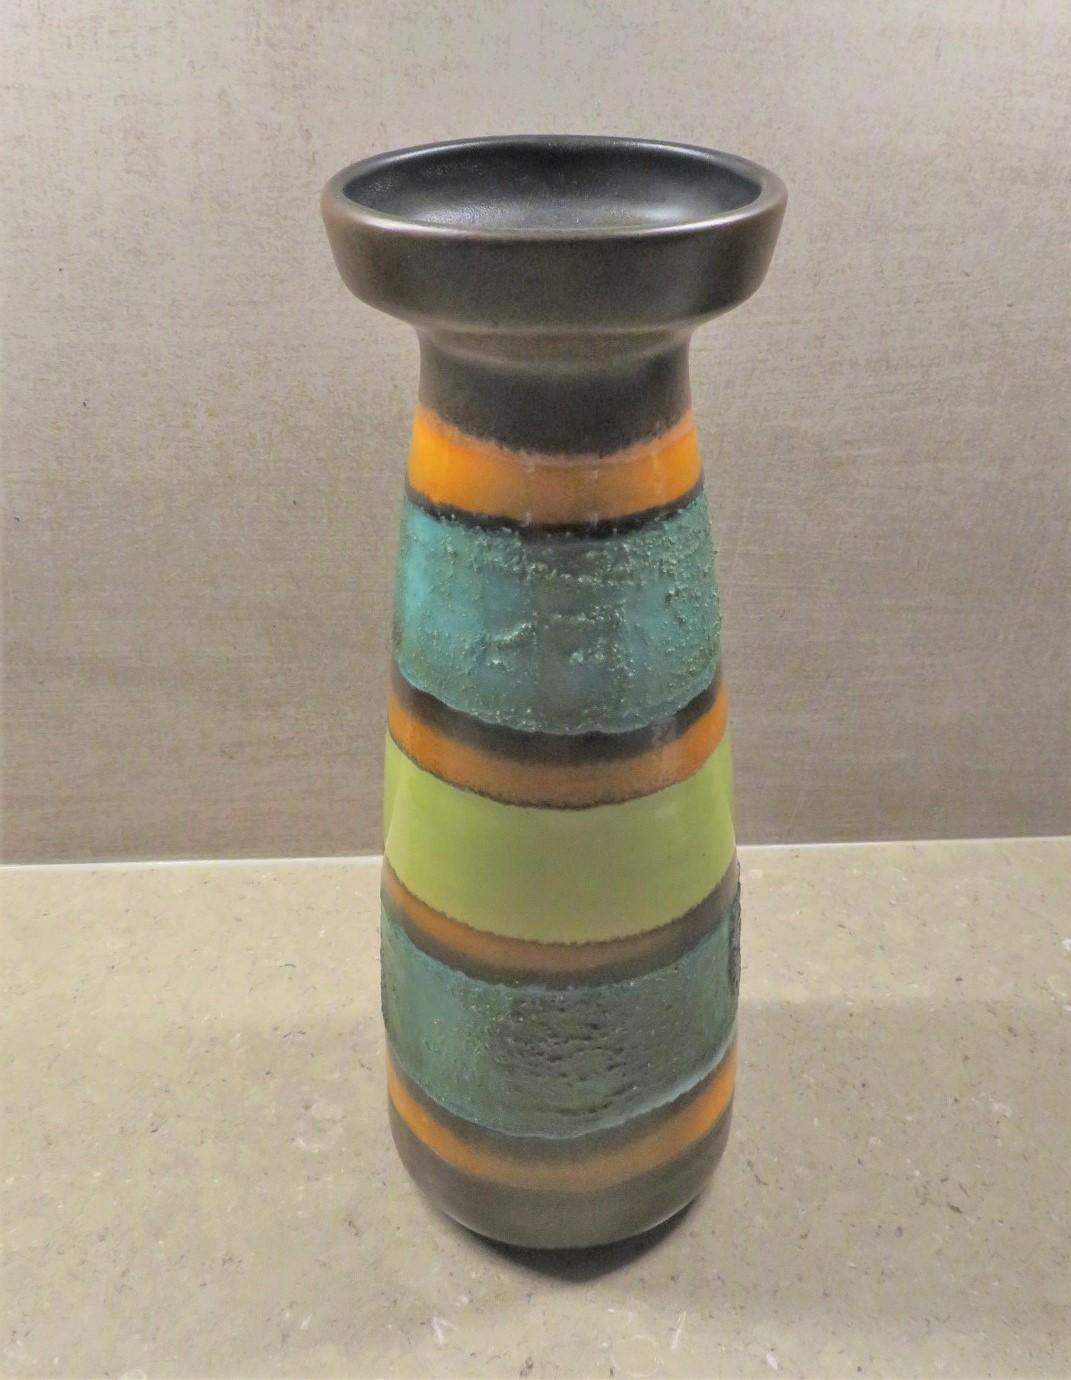 Bright and colorful Mid-Century Modern East German ceramic lava glaze vase from the 1960s and VEB Haldensleben.

VEB Haldensleben was formed from the Carstens Uffrecht factory in 1945. VEB stands for the German “Volkseigener Betrieb”, meaning a